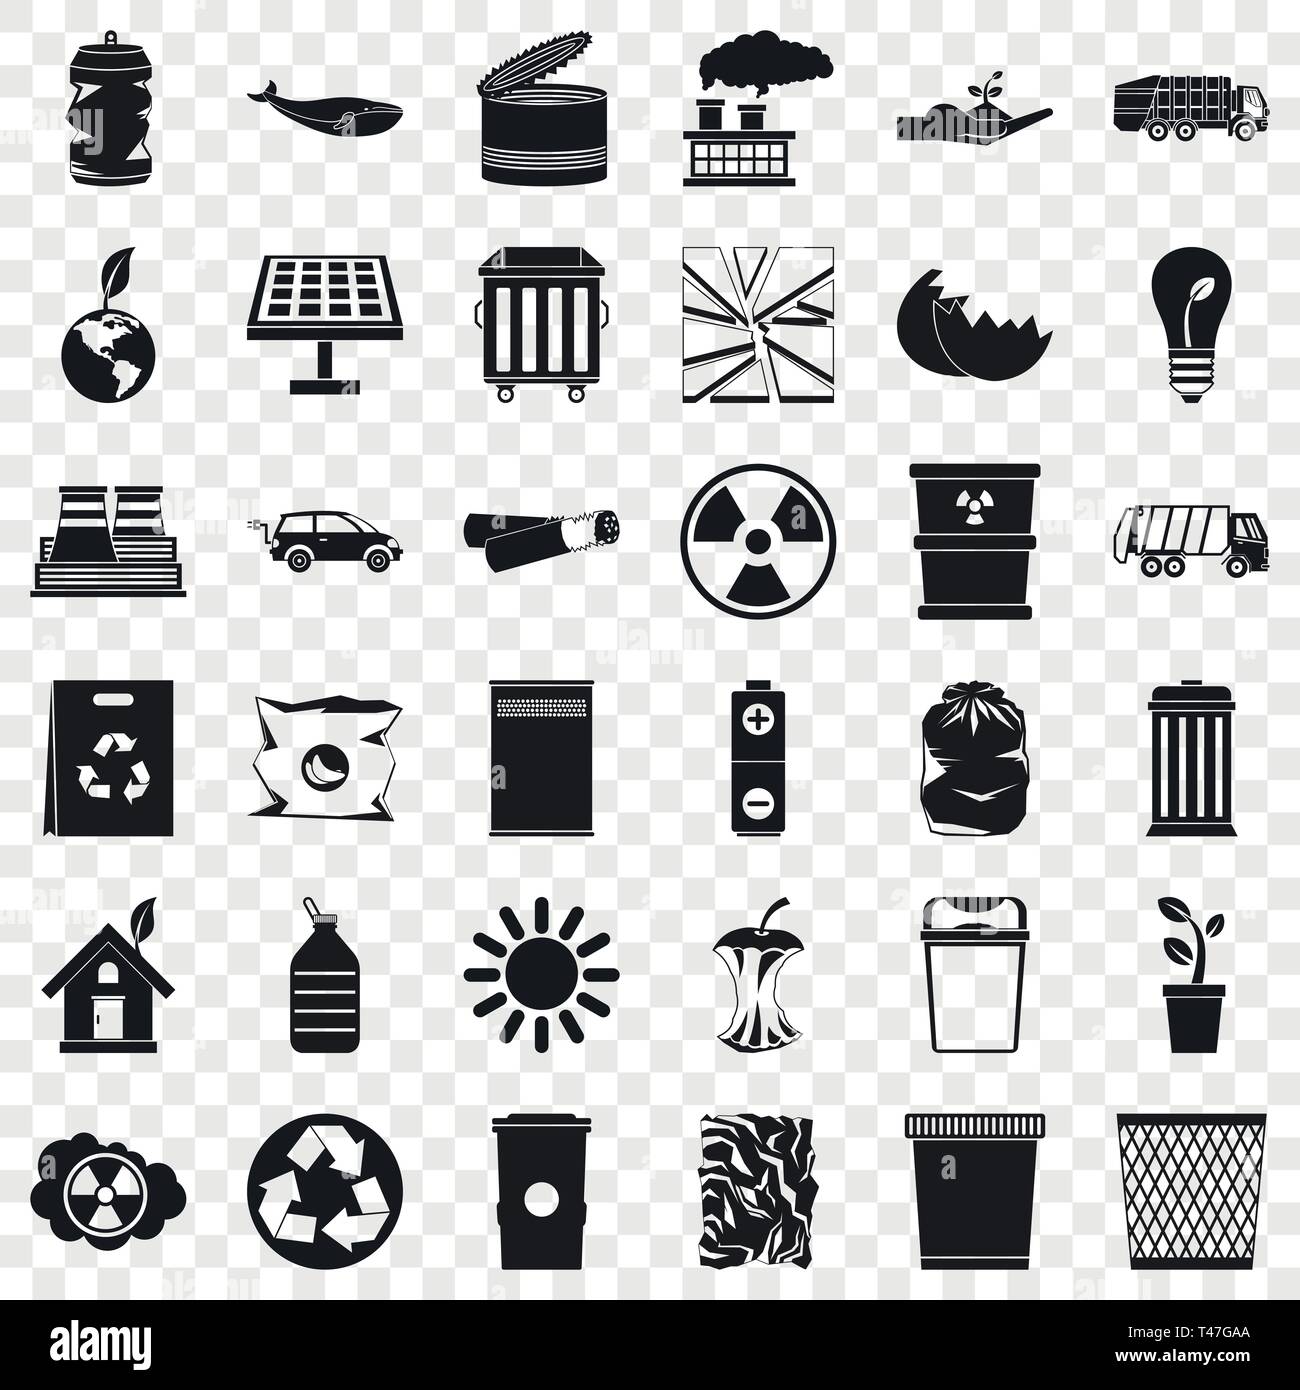 Save ecology icons set, simple style Stock Vector